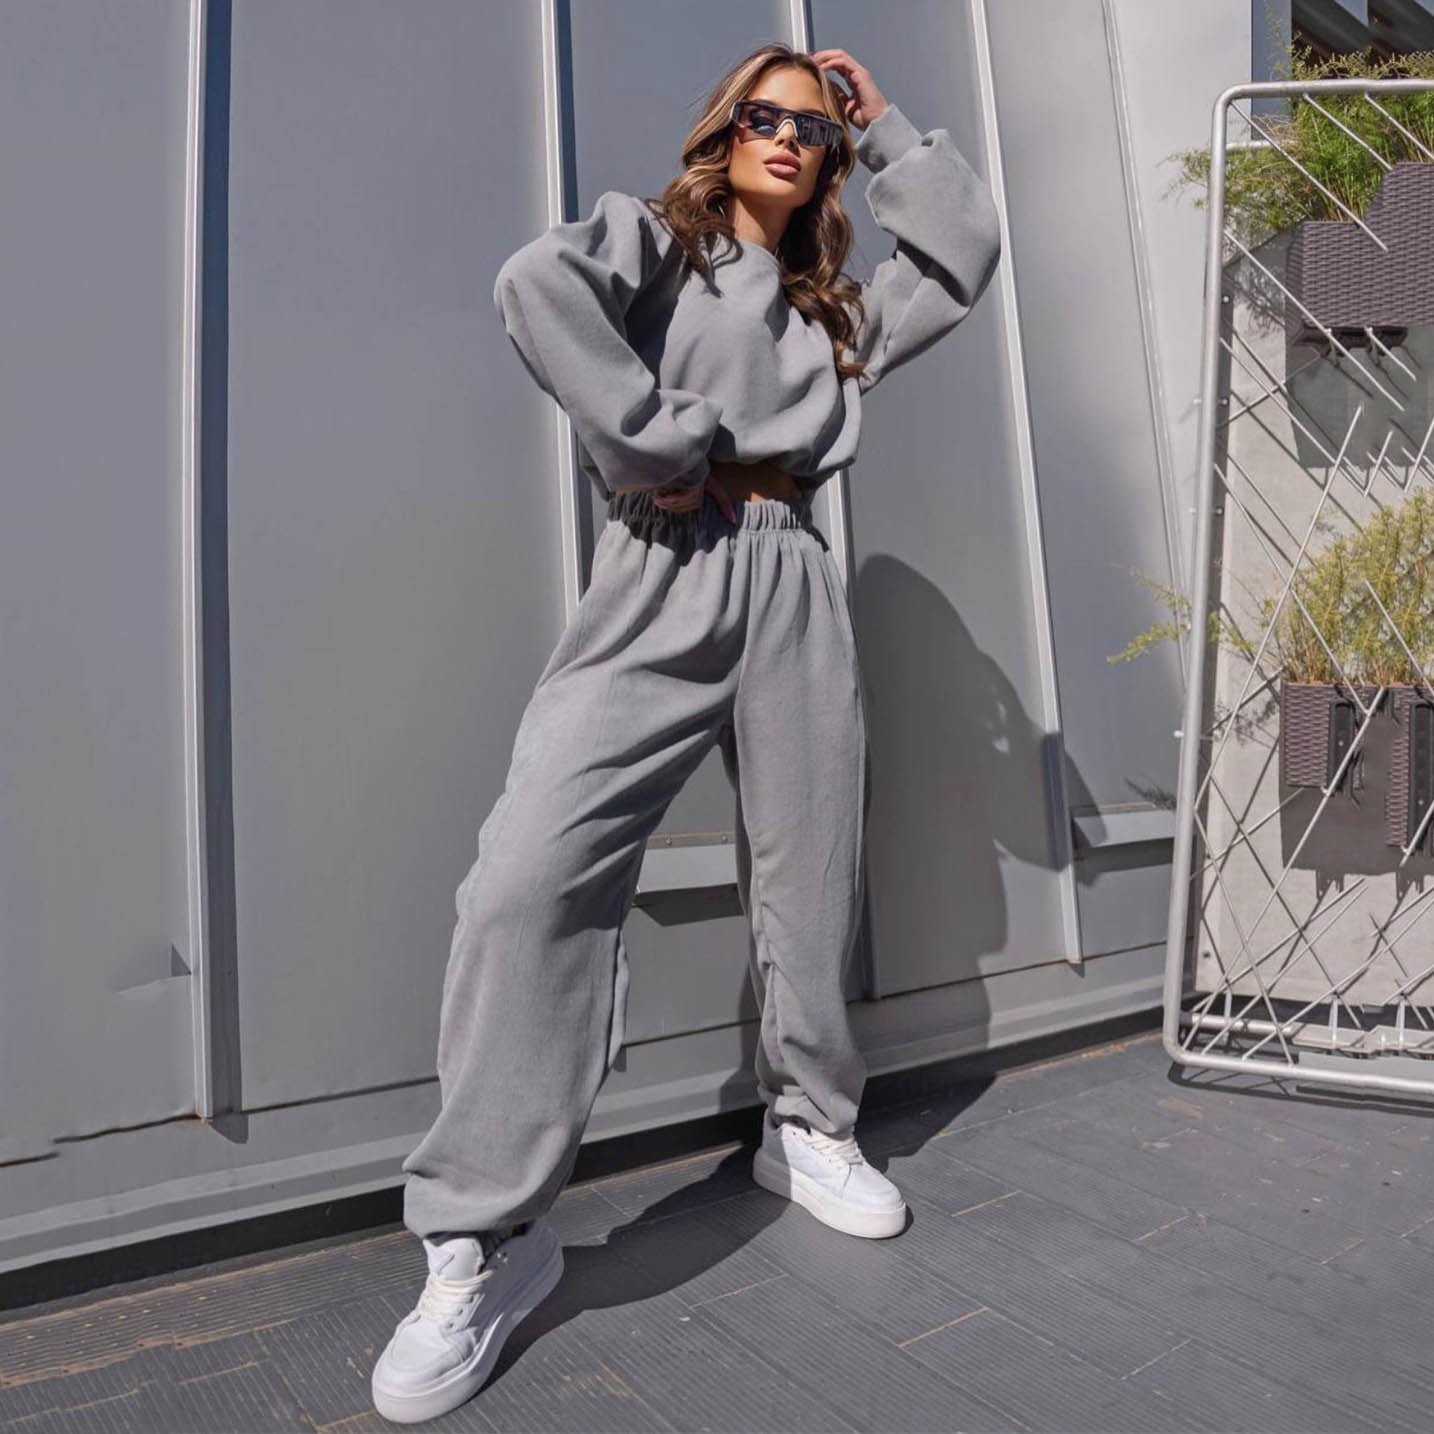 Grey Coat with Sweatpants Outfits For Women (10 ideas & outfits